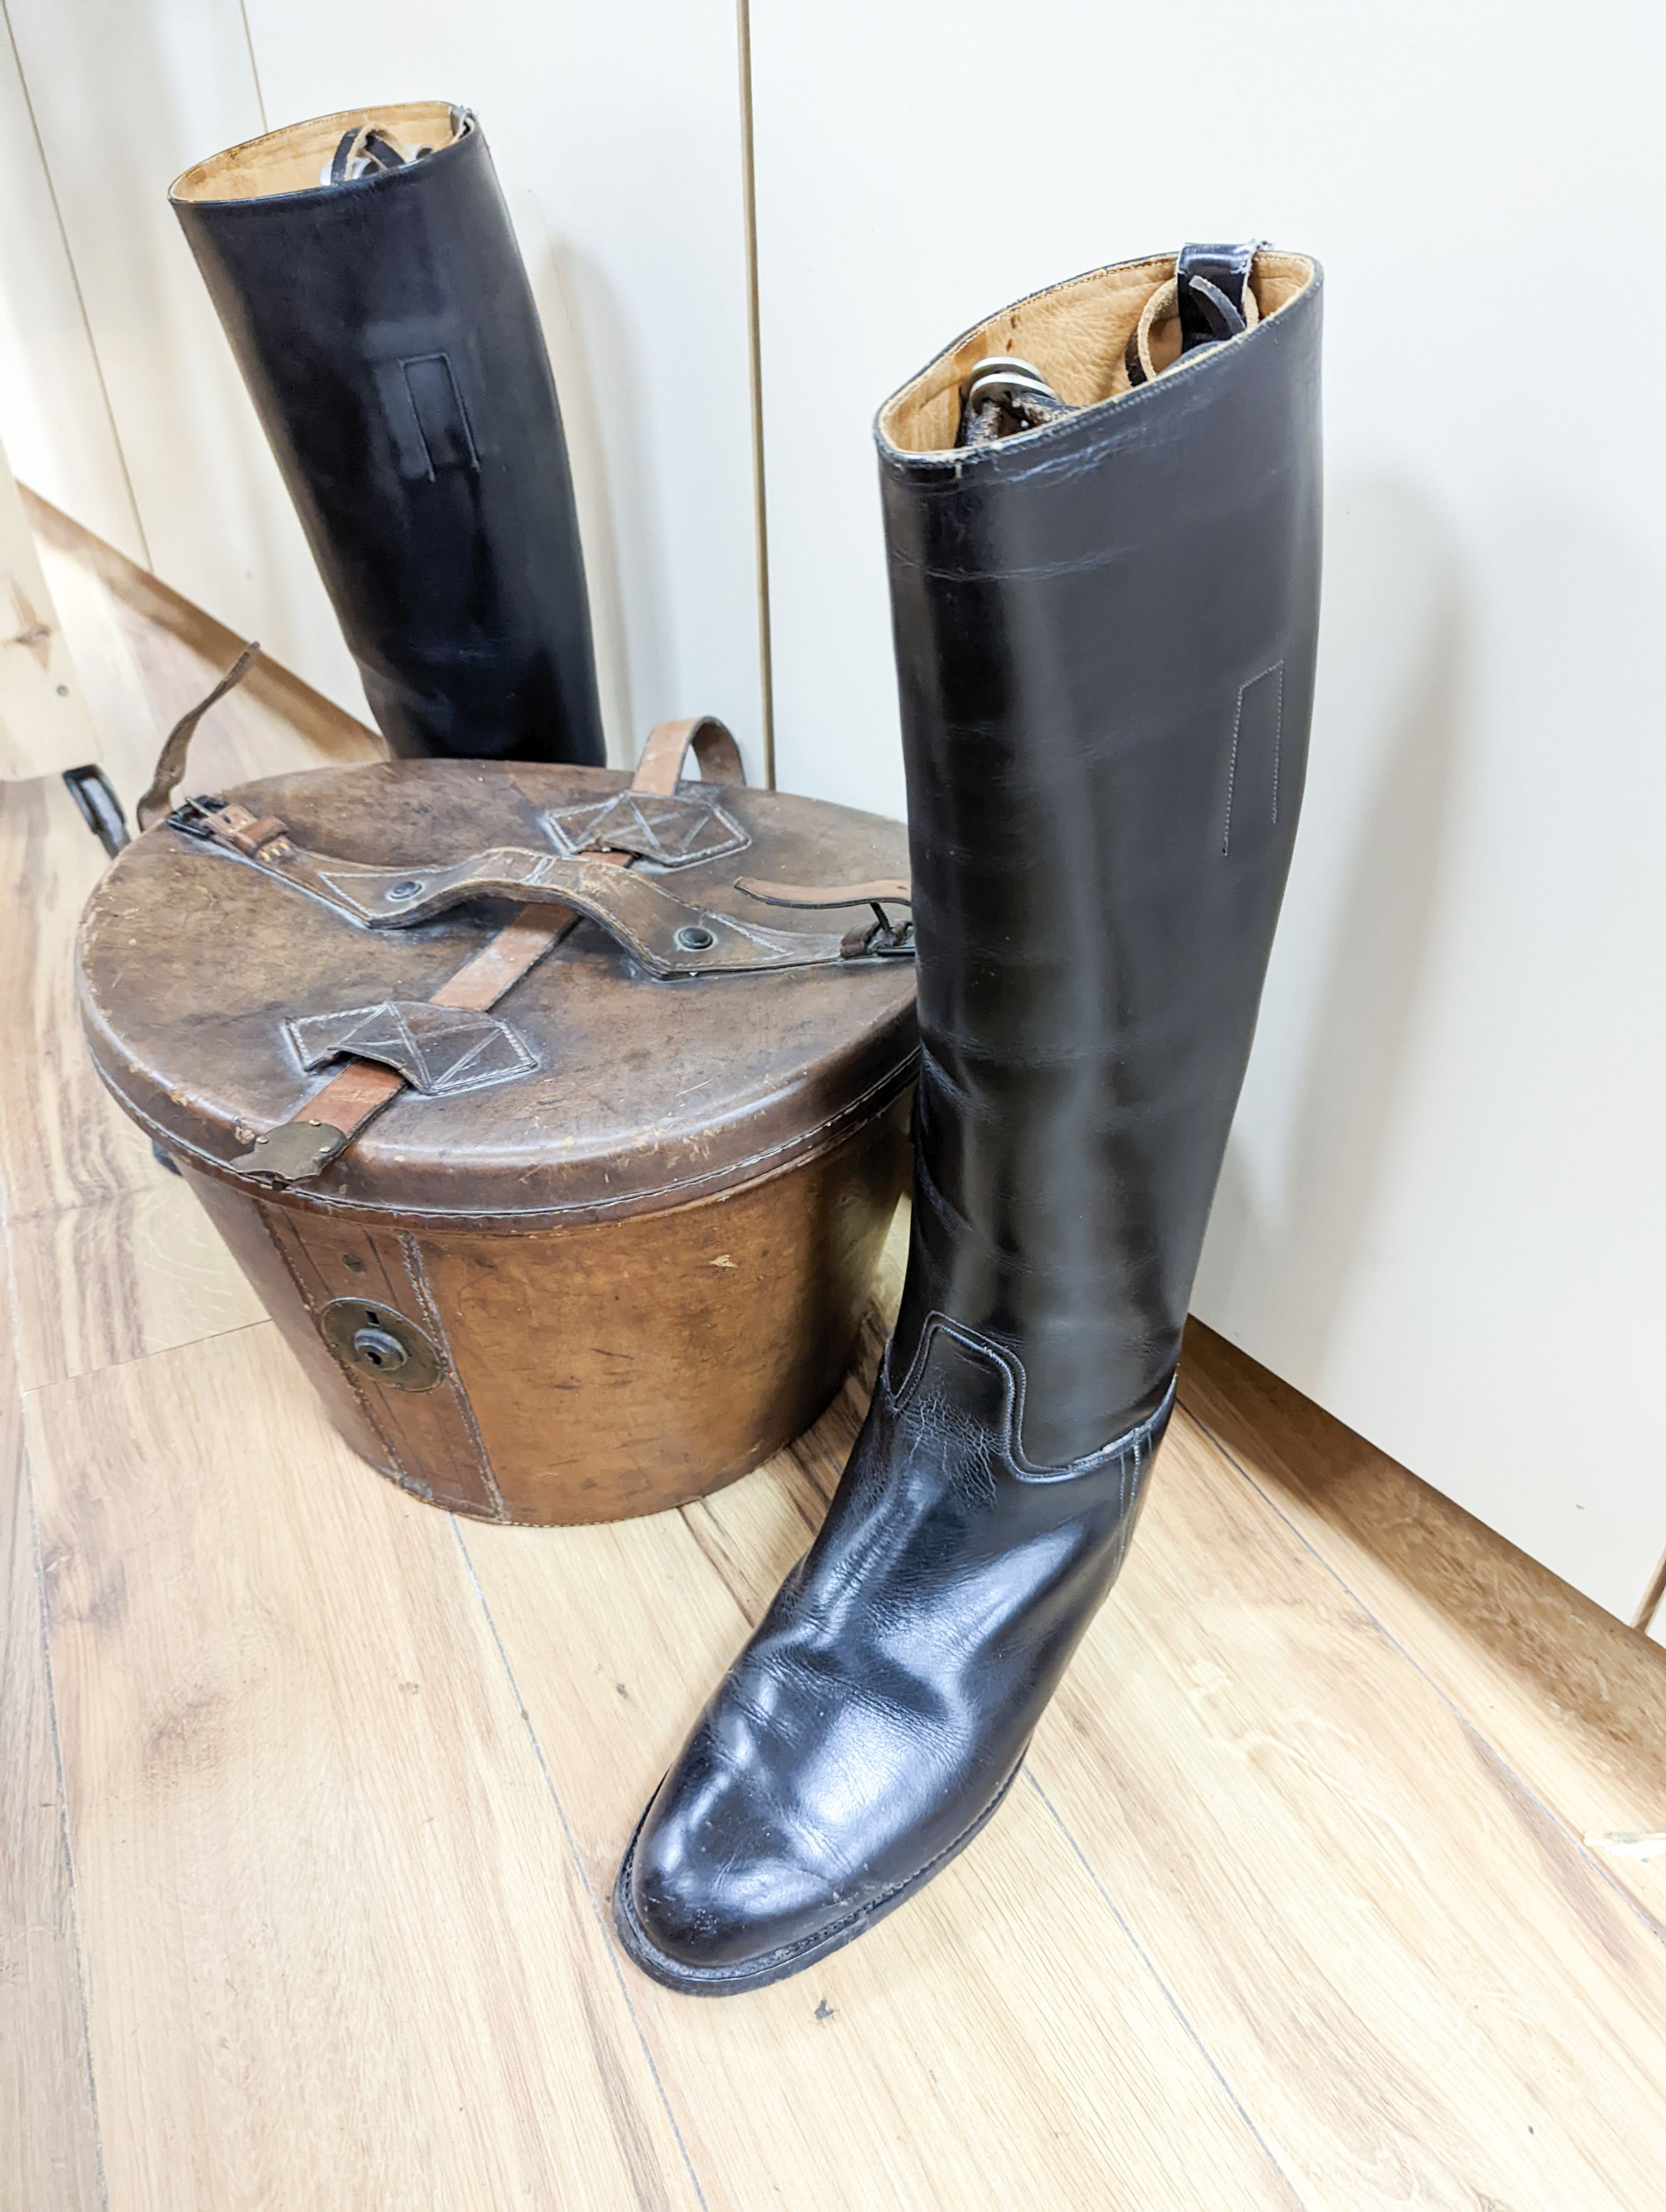 A gents 8 1/2 sized riding boots and a brown leather case for a top hat